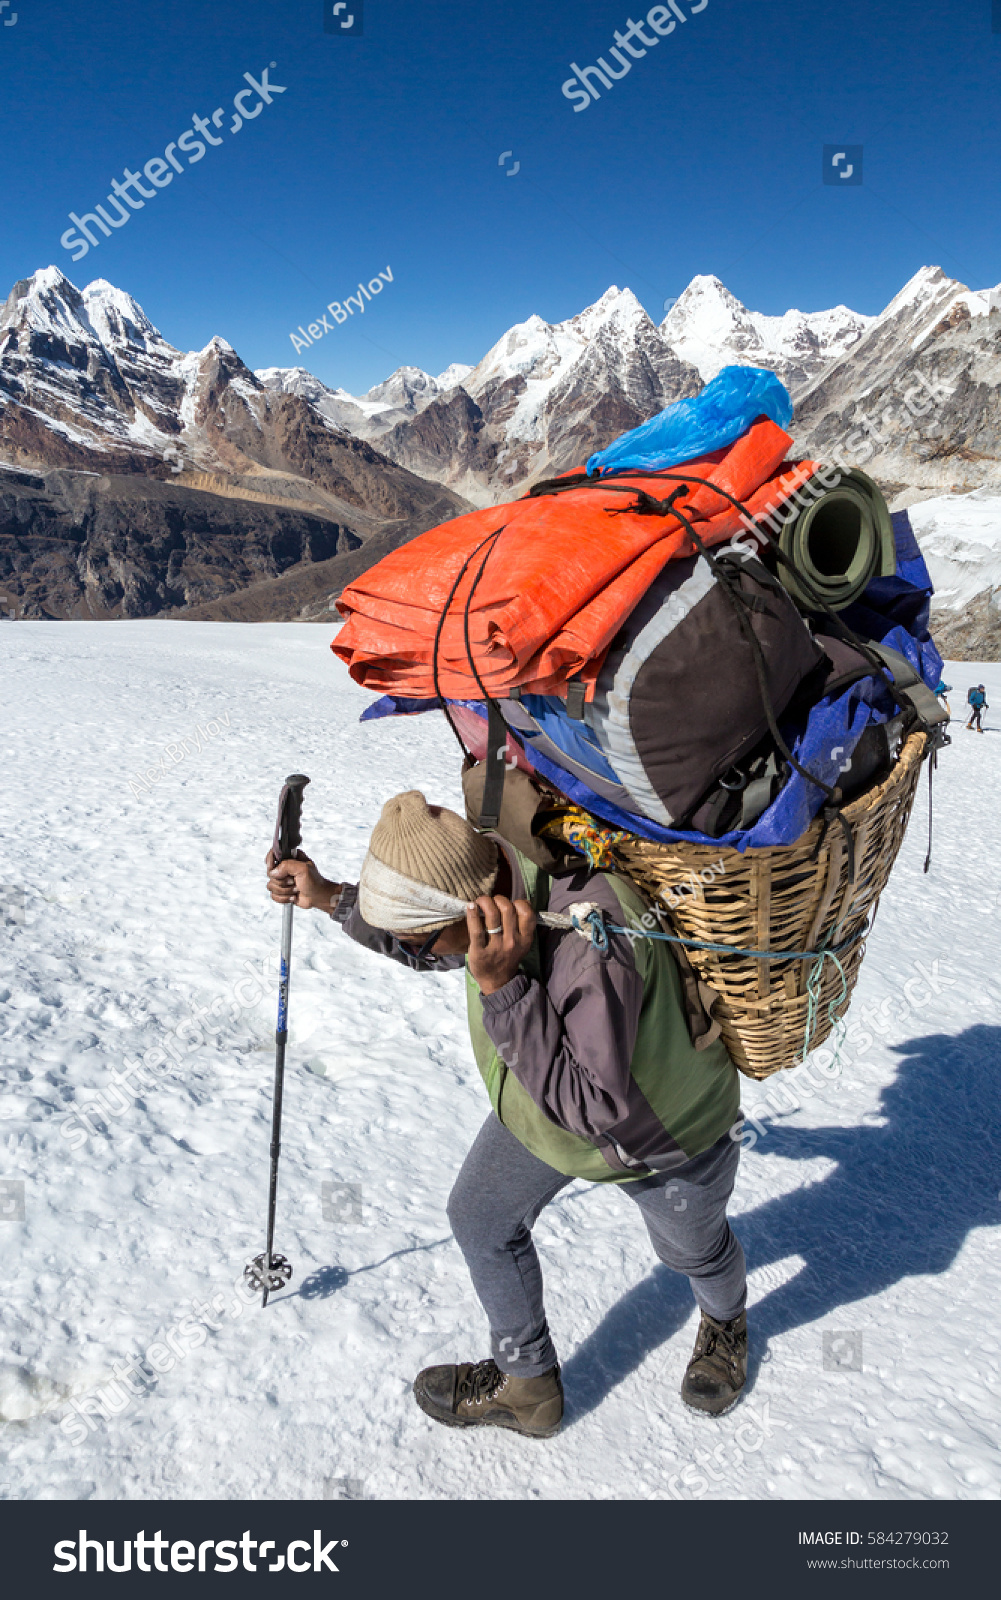 stock-photo-nepalese-sherpa-porter-walking-on-glacier-with-trekking-pole-carrying-basket-with-lots-of-mountain-584279032.jpg